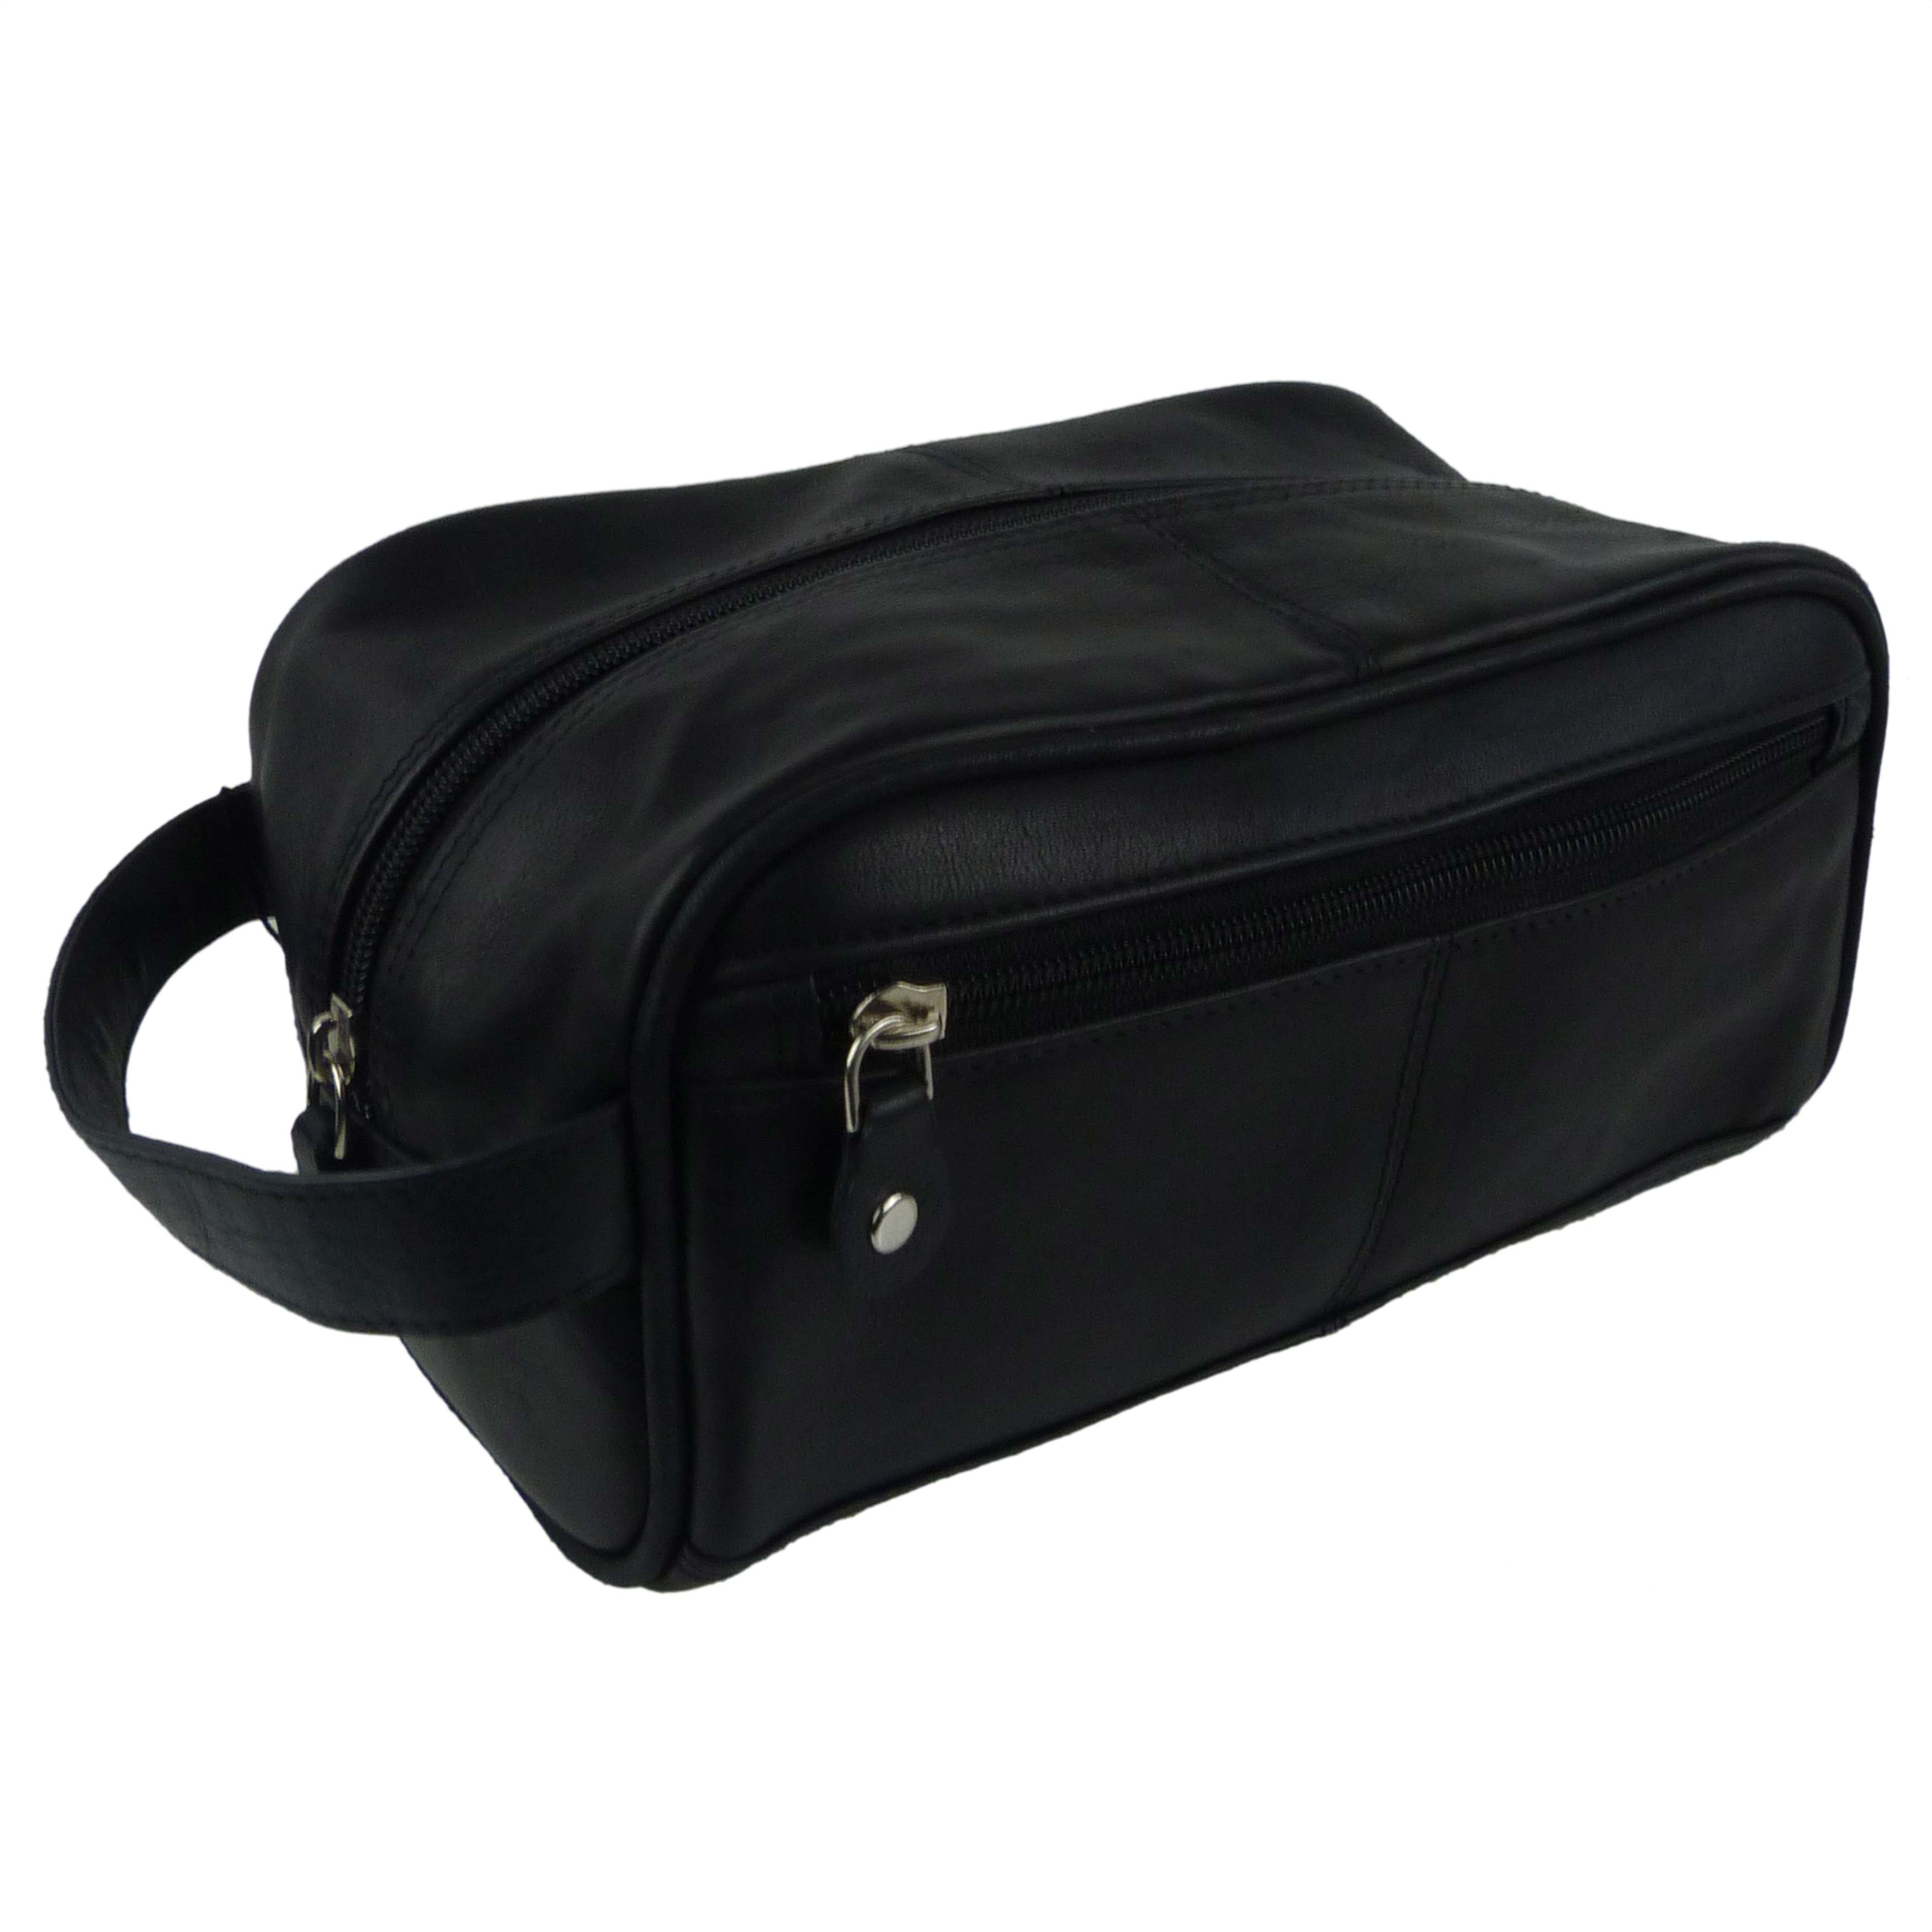 Mens Leather Small Wash Bag by Prime Hide Travel Toiletries Quality Black Handy 5055527780404 | eBay